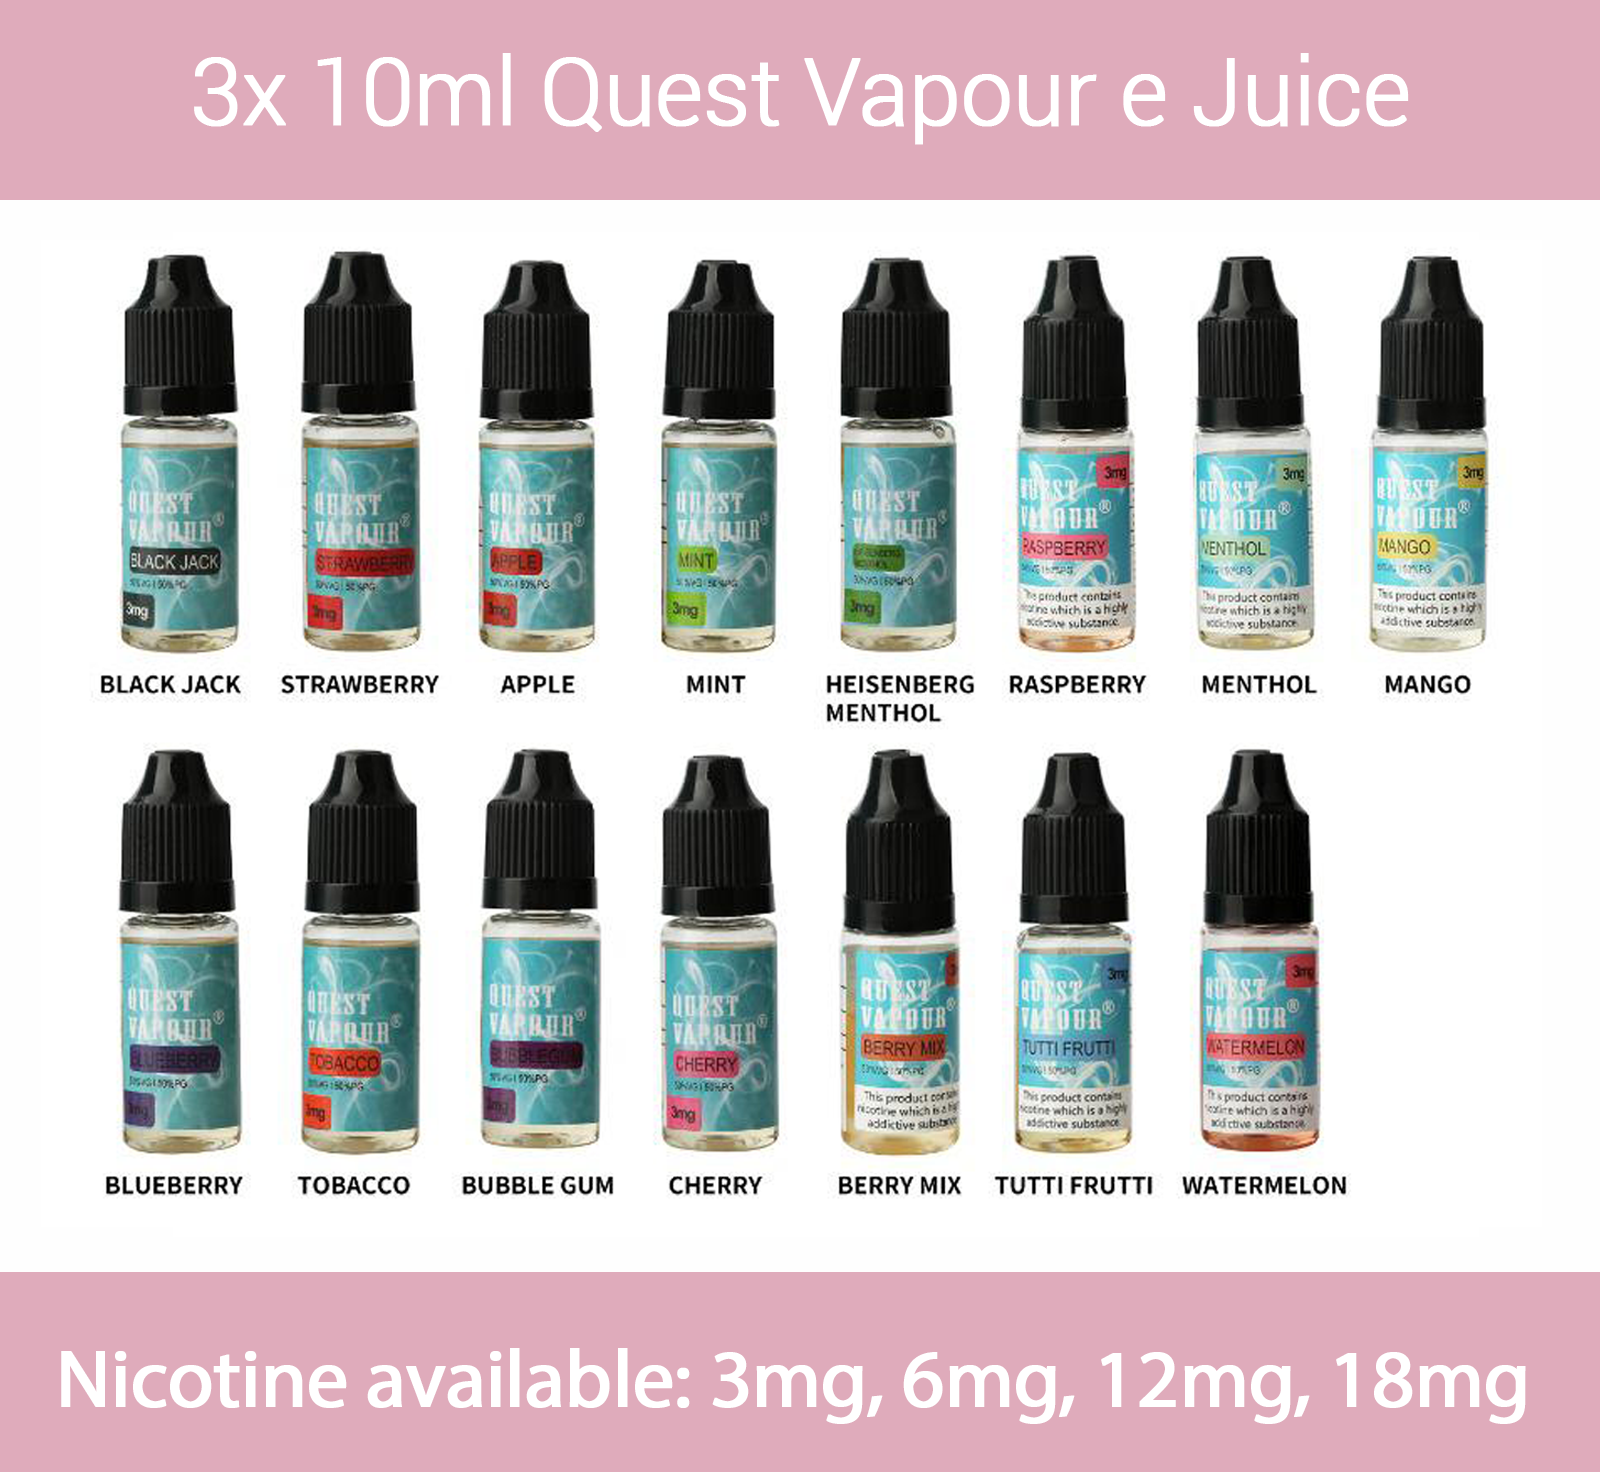 This is an image of QuestVapours 3X10Ml for £10